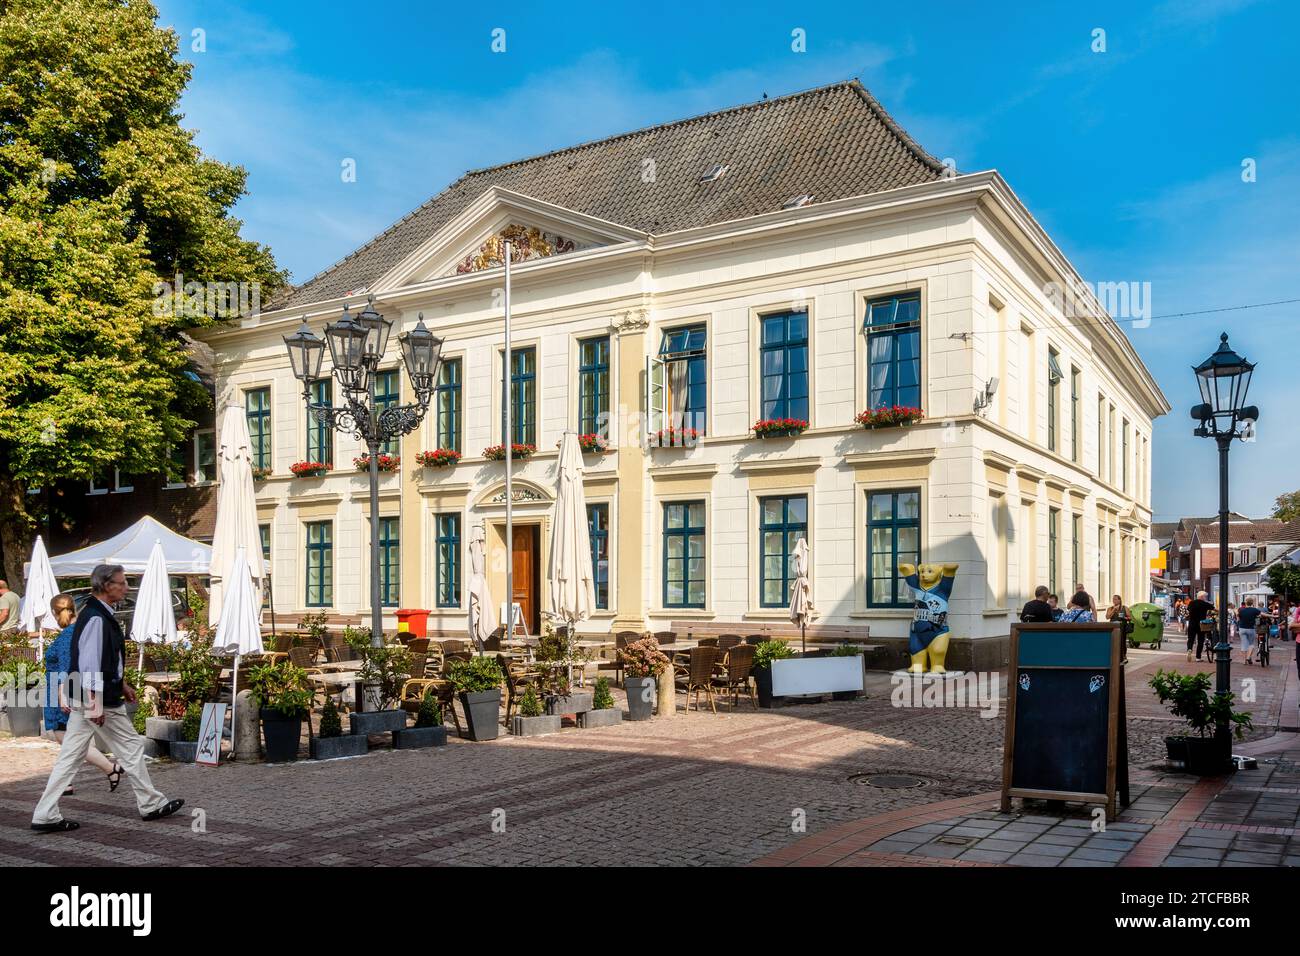 Town hall at the market in Esens im Harlingerland - Rathaus am Markt in Esens im Harlingerland Stock Photo